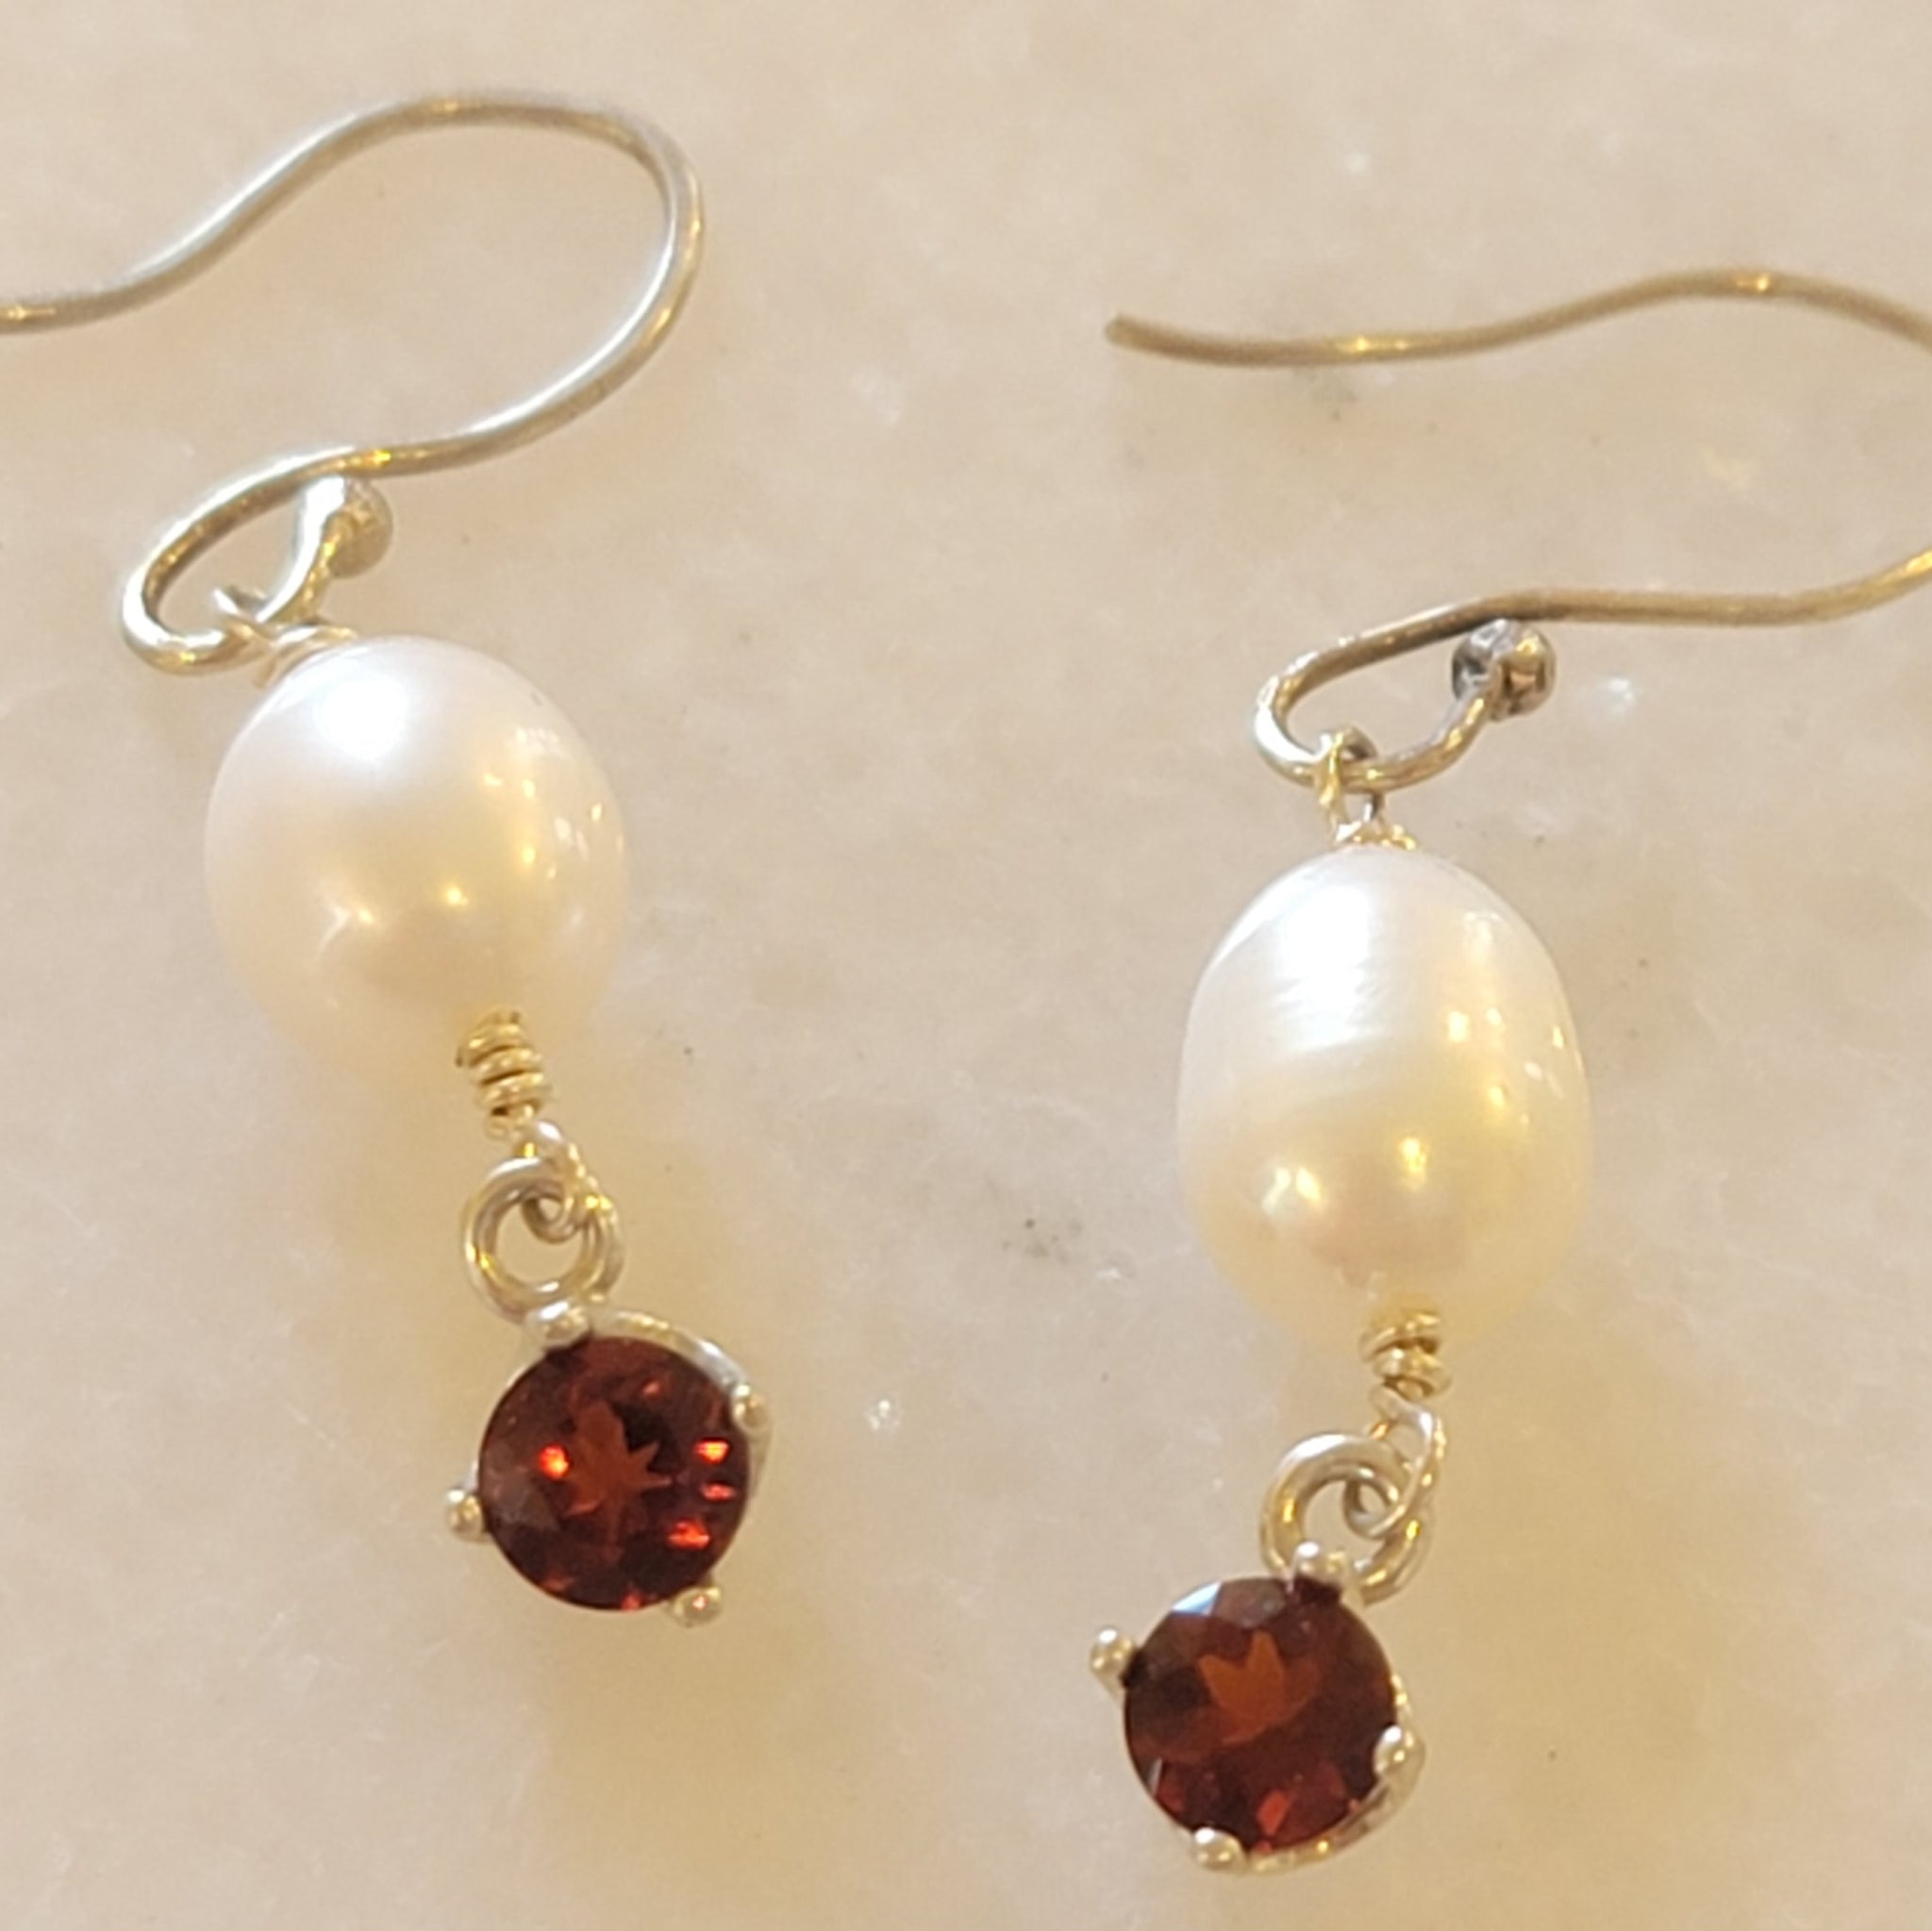 Fire Citrine and Pearl Earrings by Sylvia Dawe